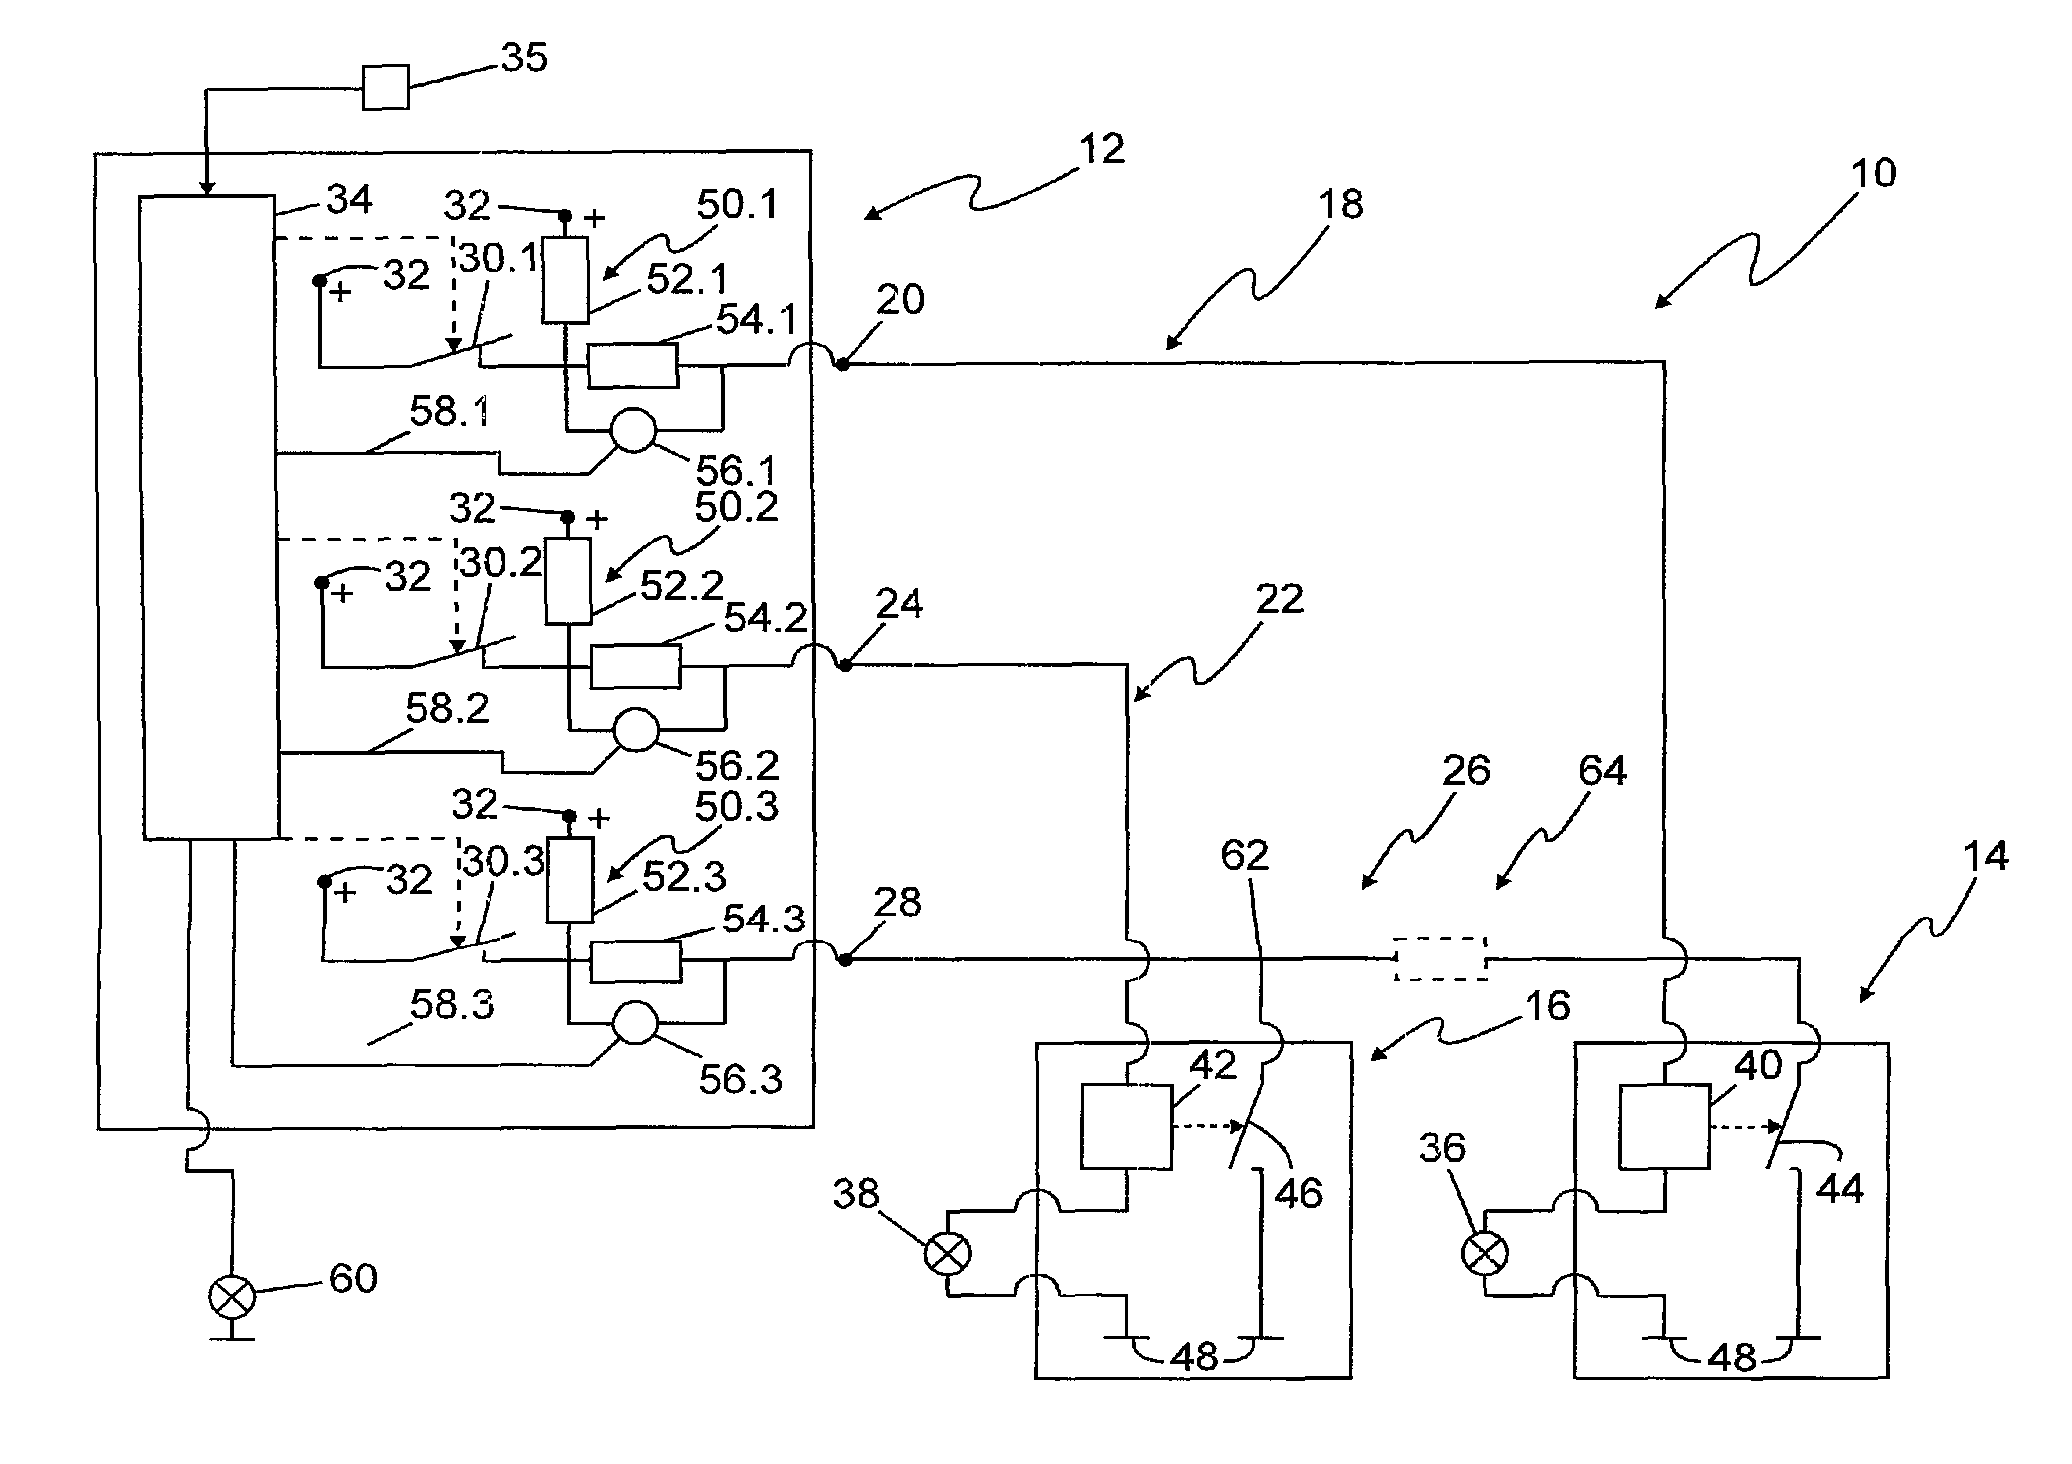 Internal power supply control device having at least one lighting control device for a motor vehicle